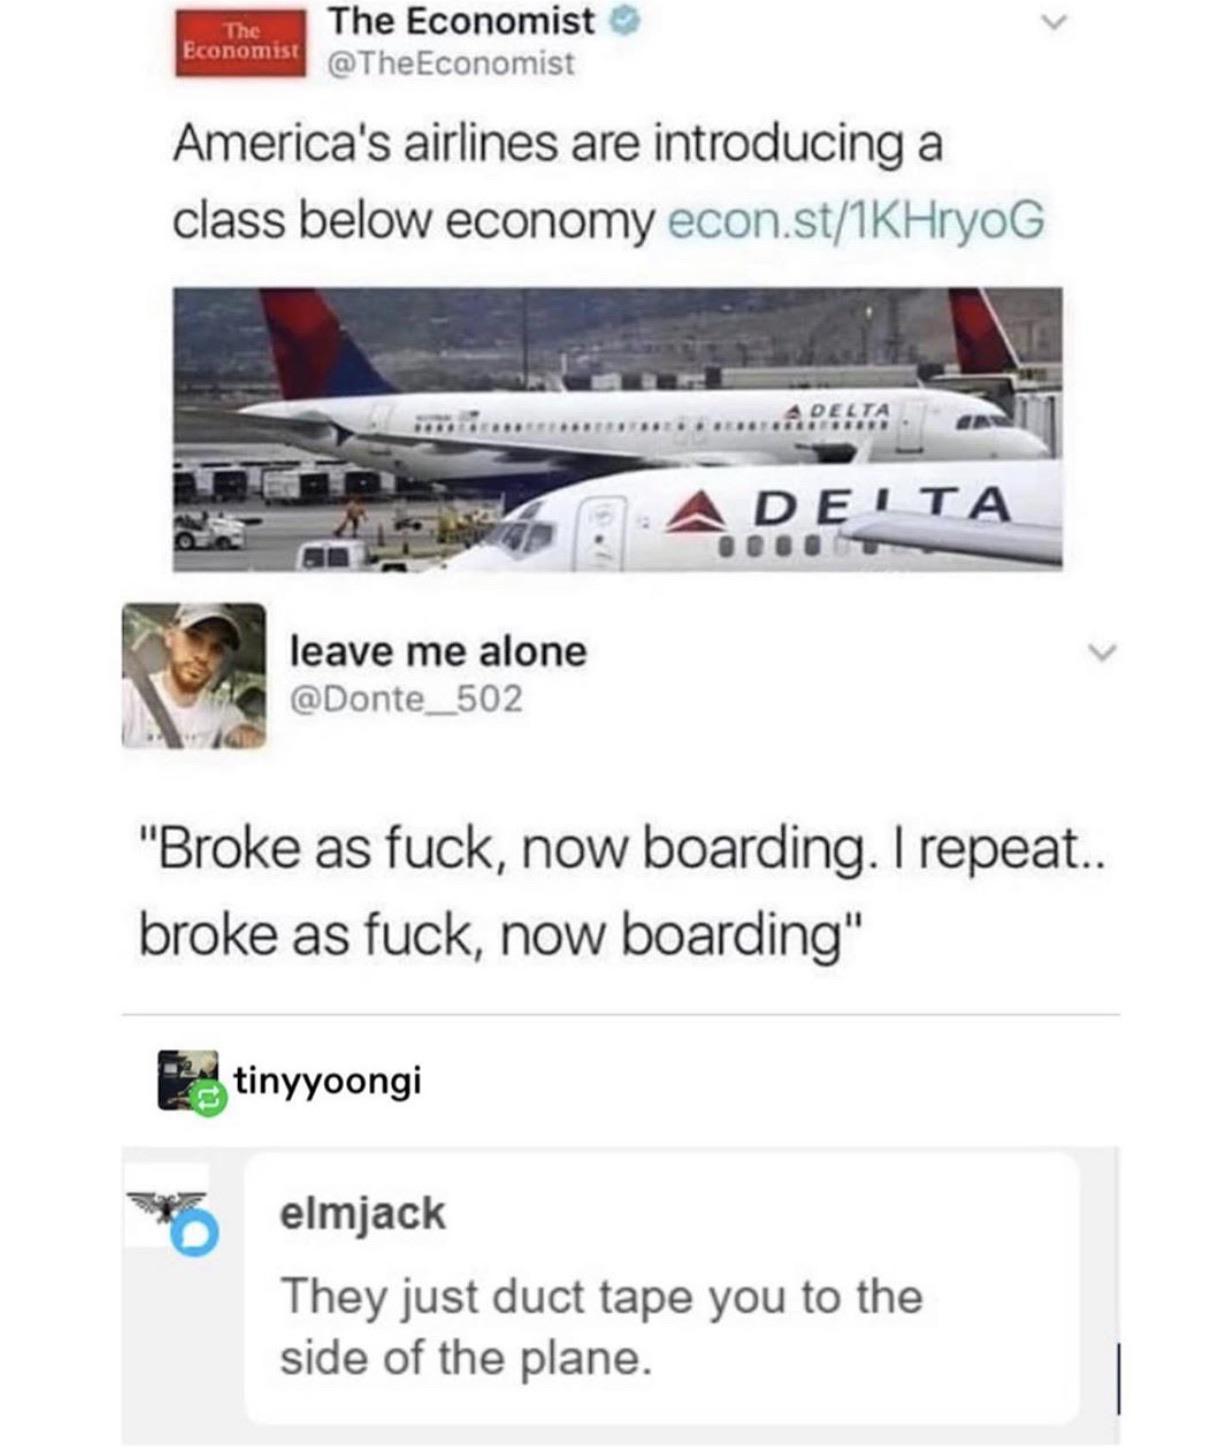 now boarding broke as fuck - The Economist The Economist Economist America's airlines are introducing a class below economy econ.st1KHrYOG > ..................... A Desta. net 14 A Delta leave me alone "Broke as fuck, now boarding. I repeat.. broke as fuc